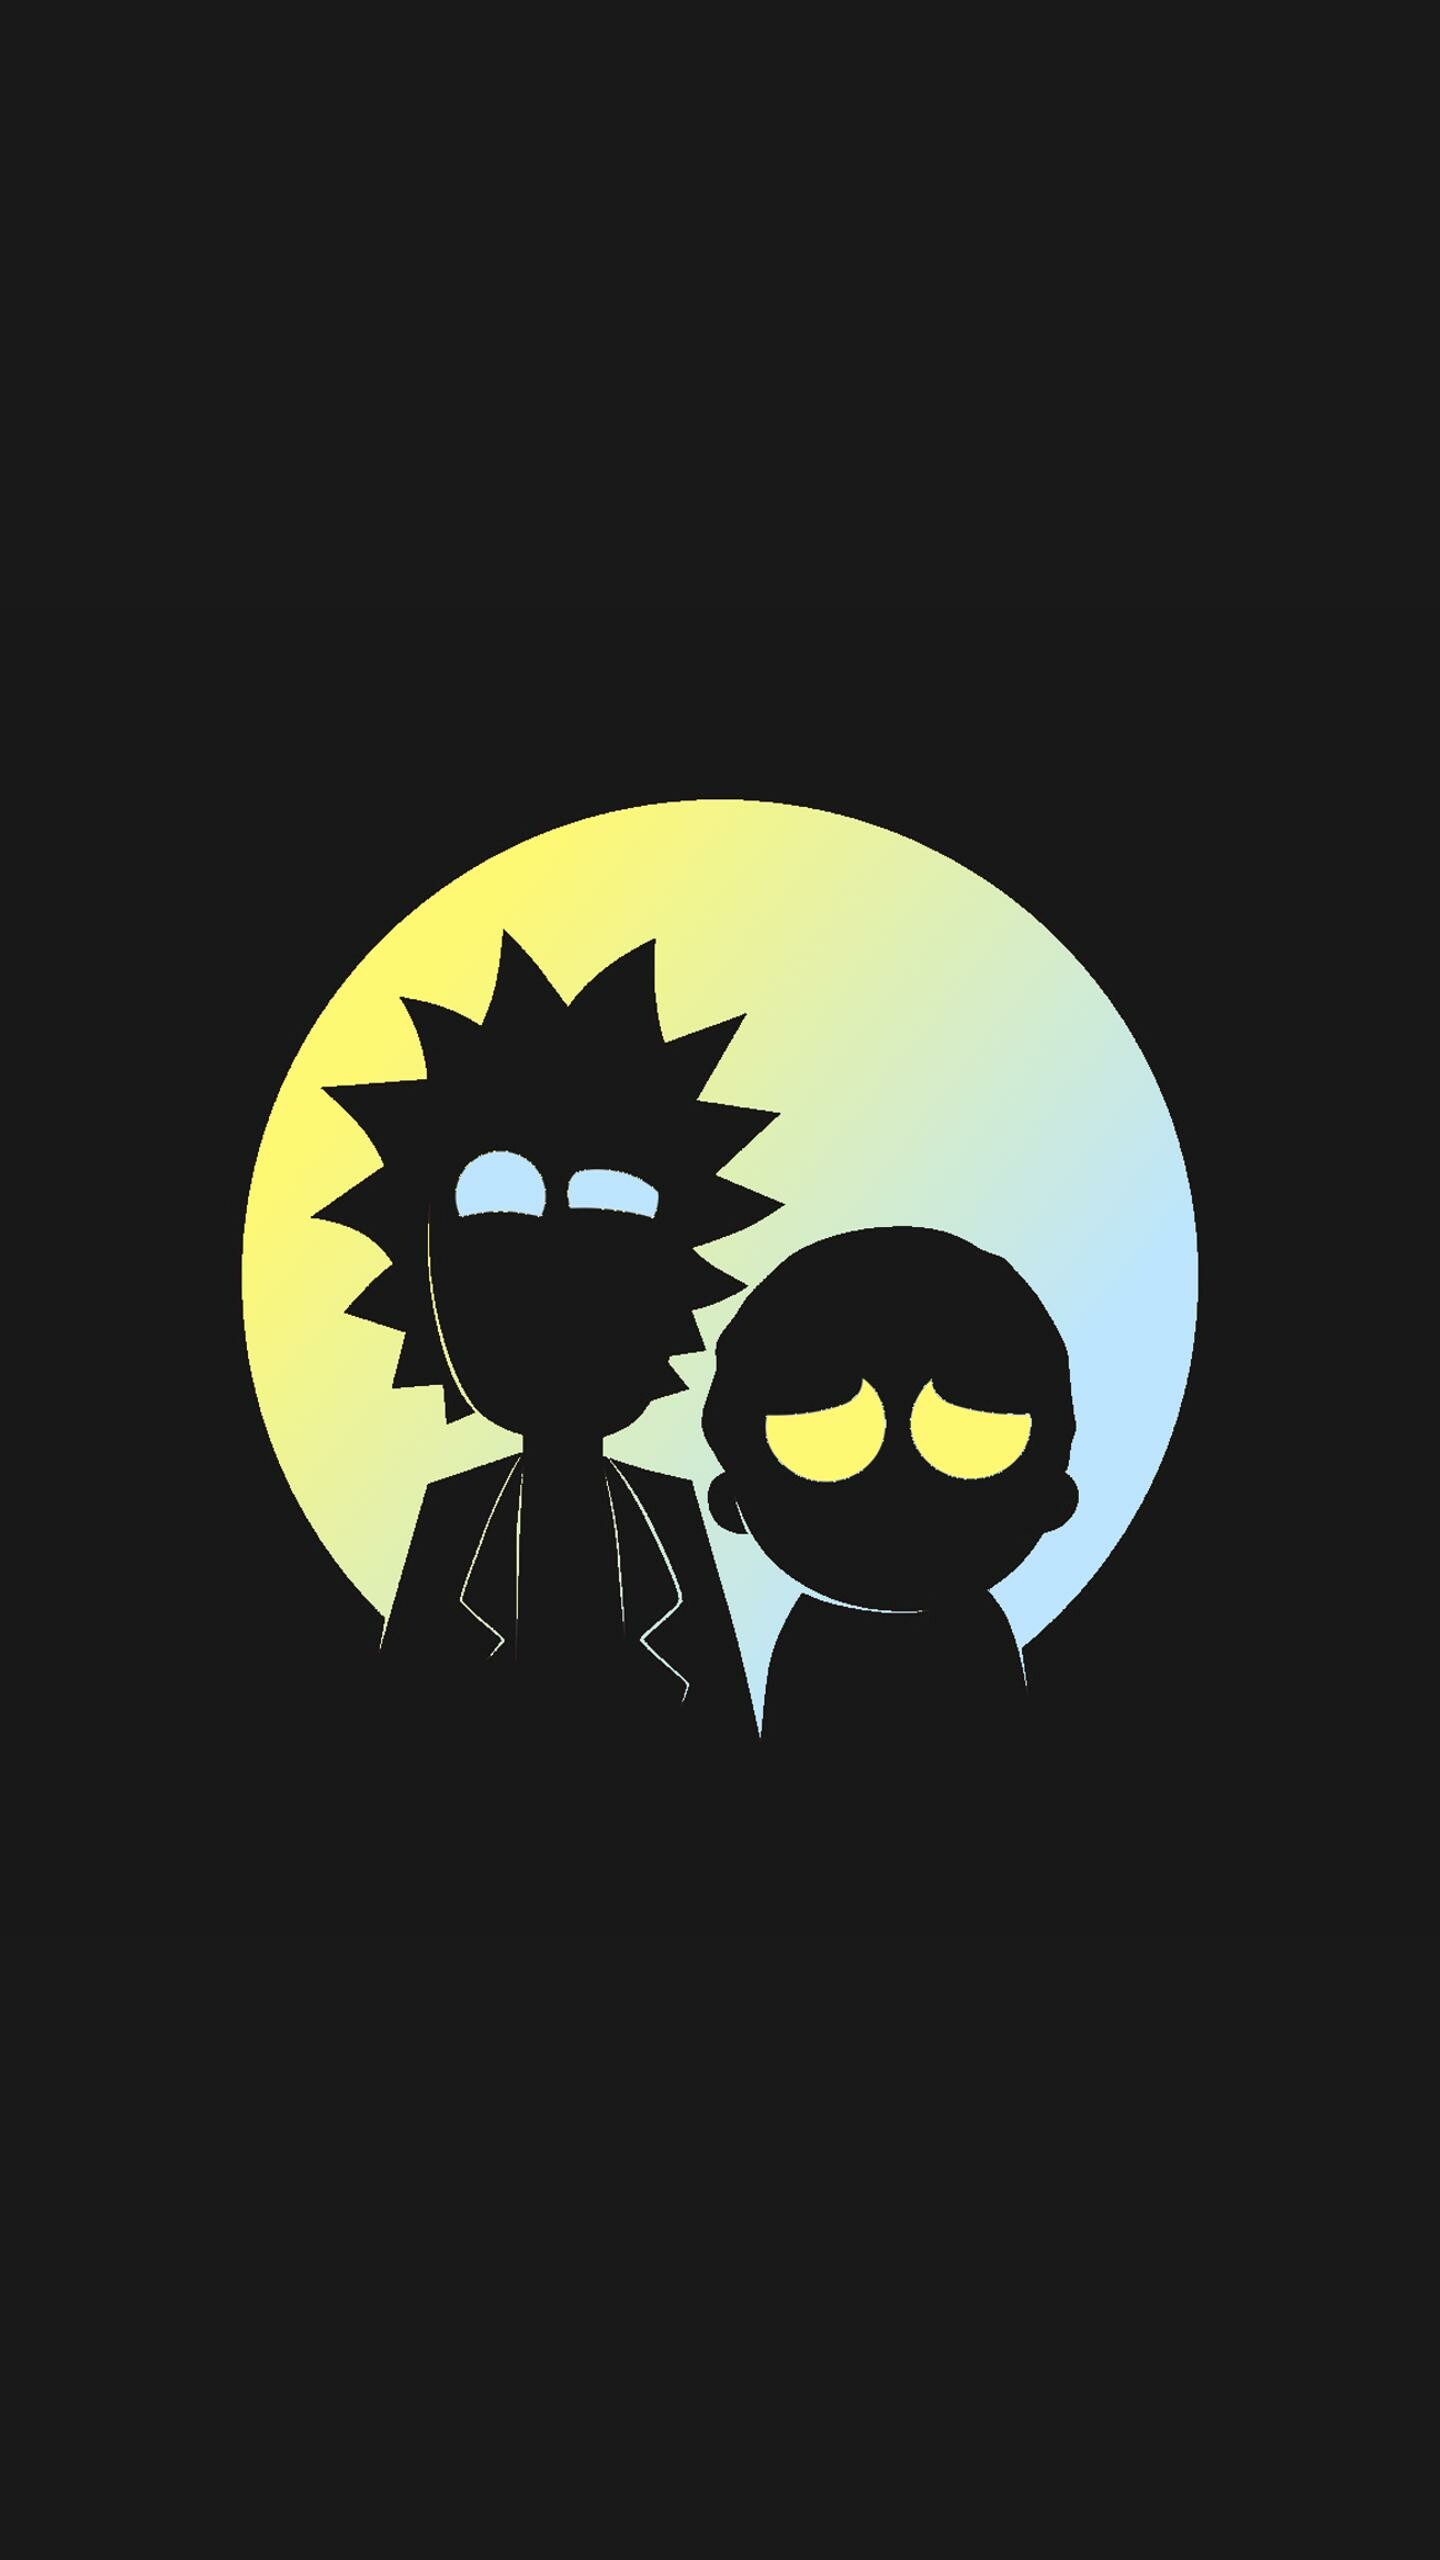 Rick and Morty: The adventures take place across an infinite number of realities. 1440x2560 HD Wallpaper.